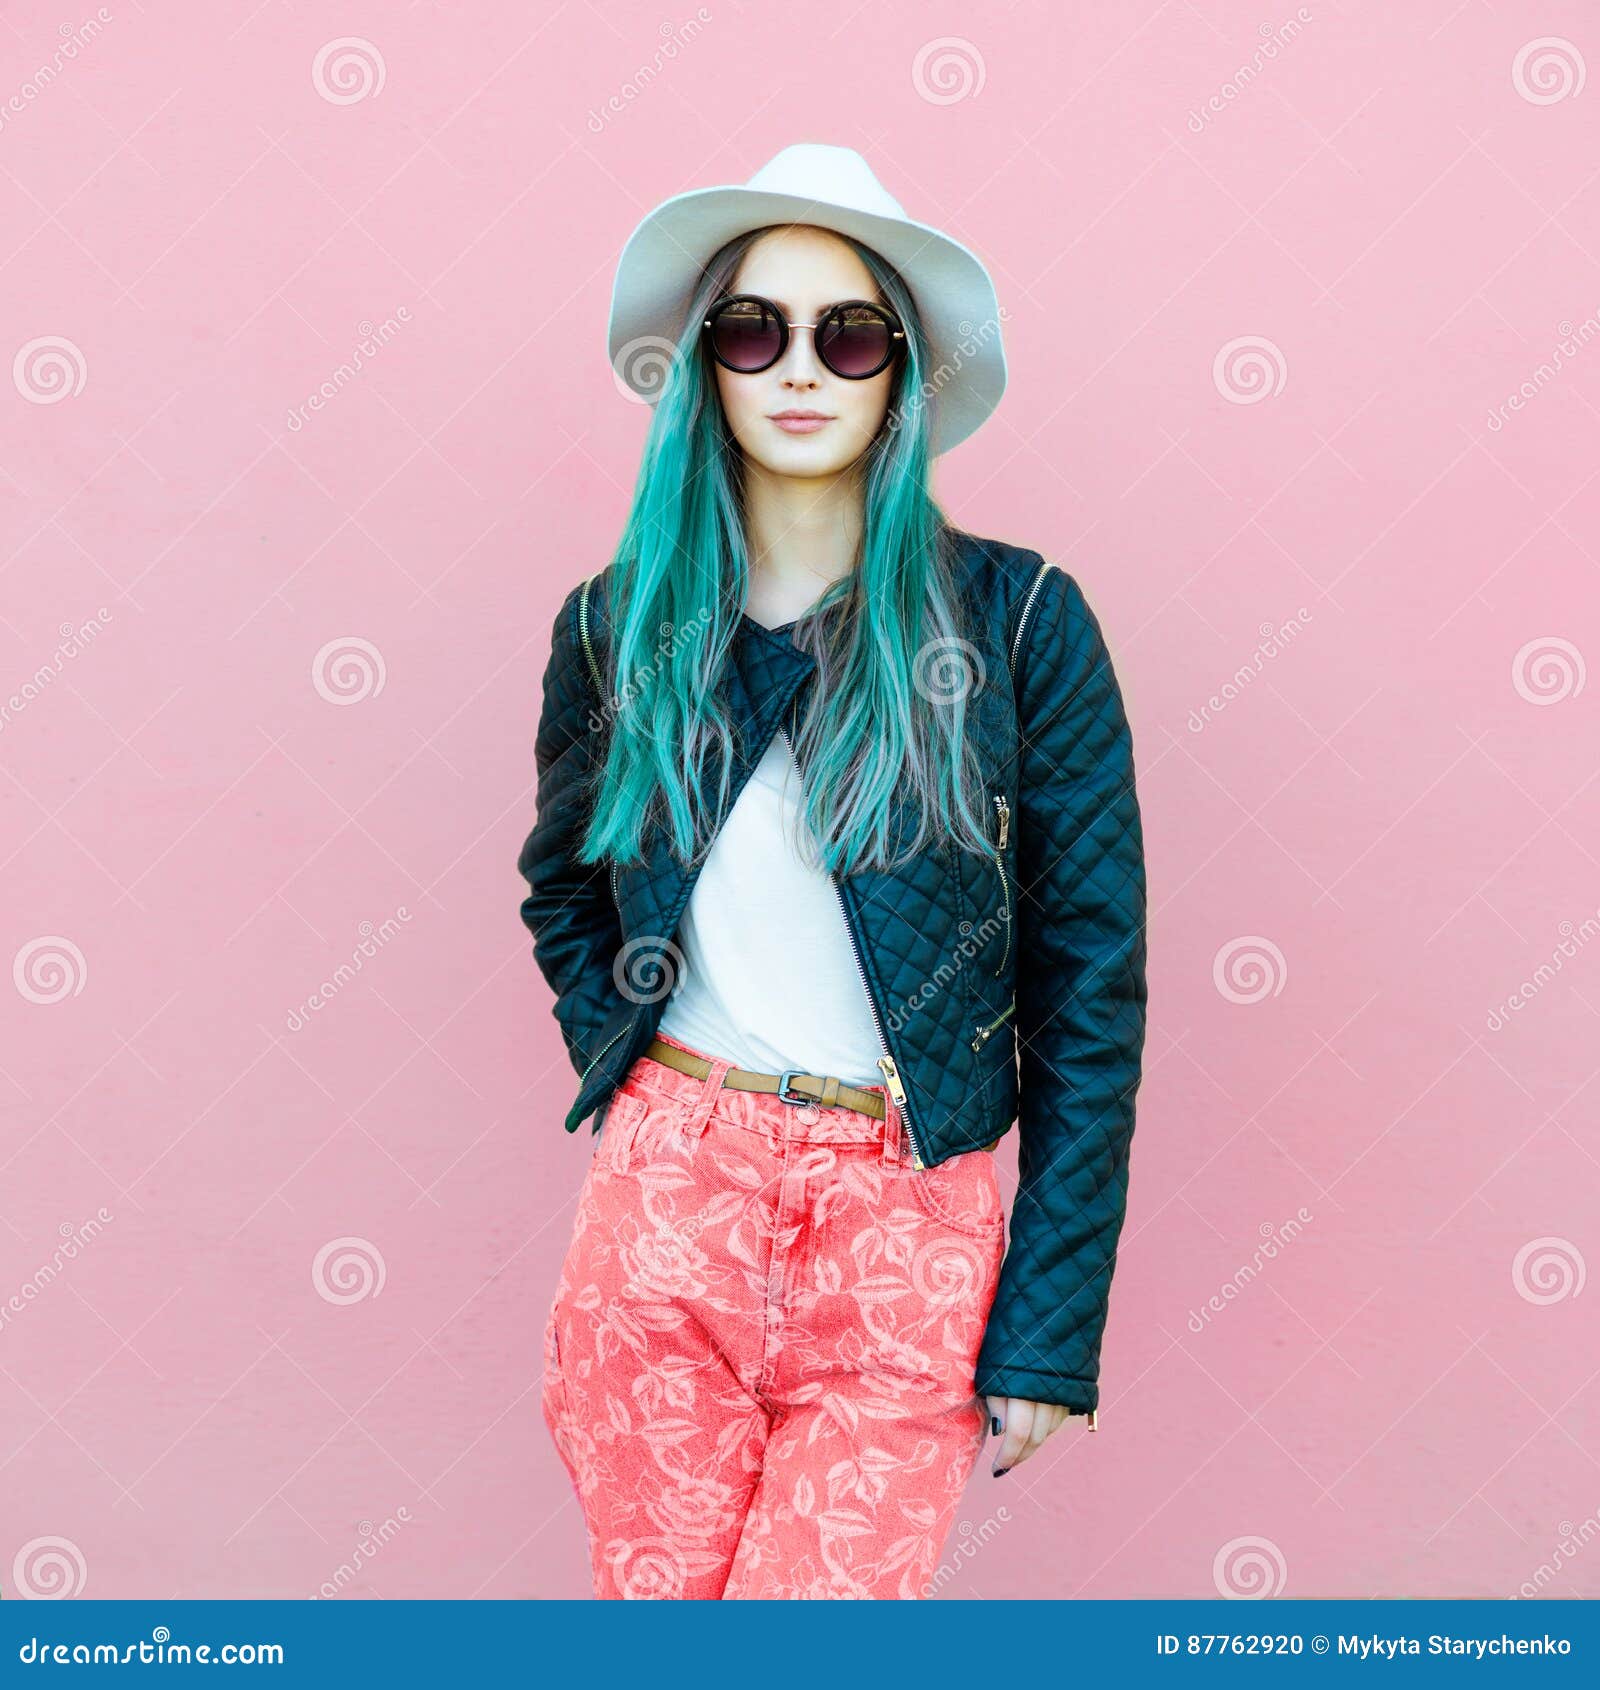 fashionable young blogger woman with blue hair wearing casual style outfit with black jacket, white hat, pink jeans and sunglasses